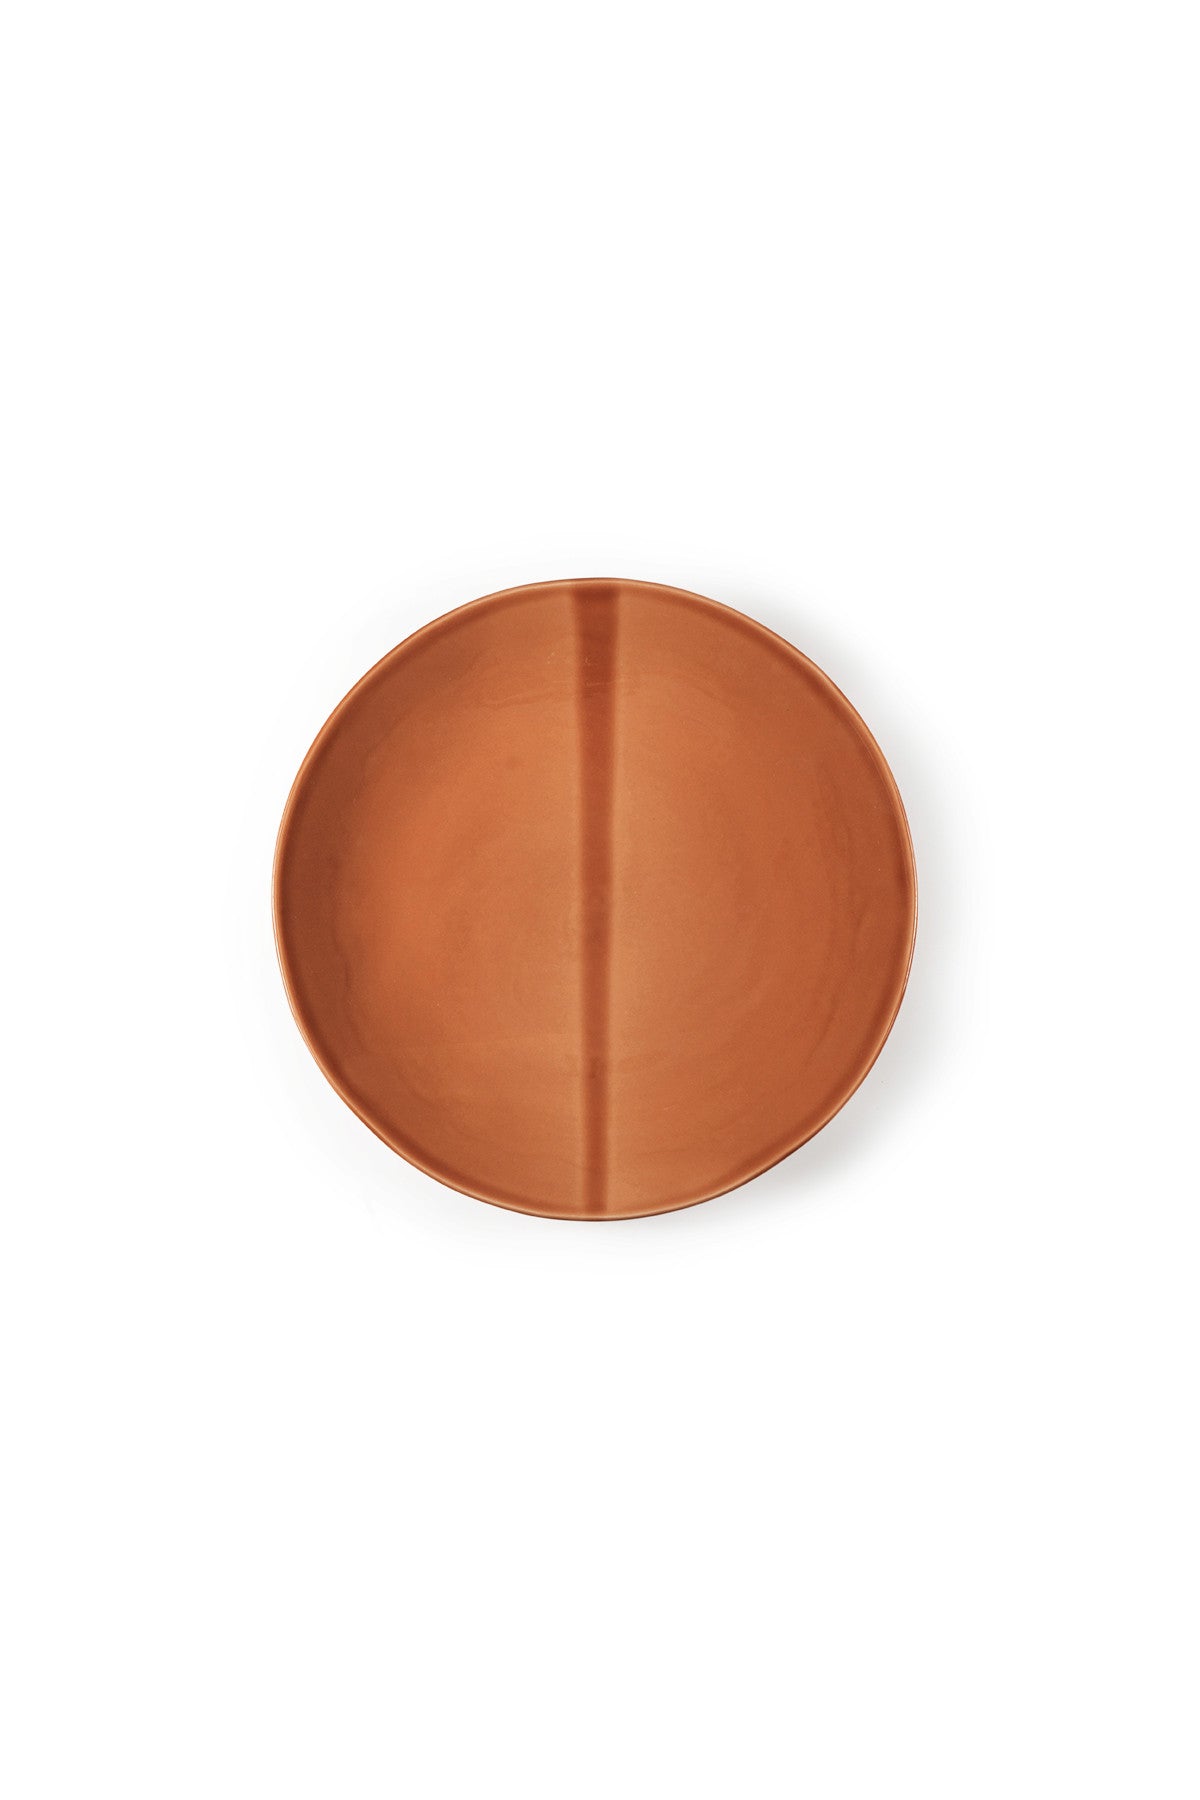 PLATE 28cm SMOOTH, TERRACOTTA